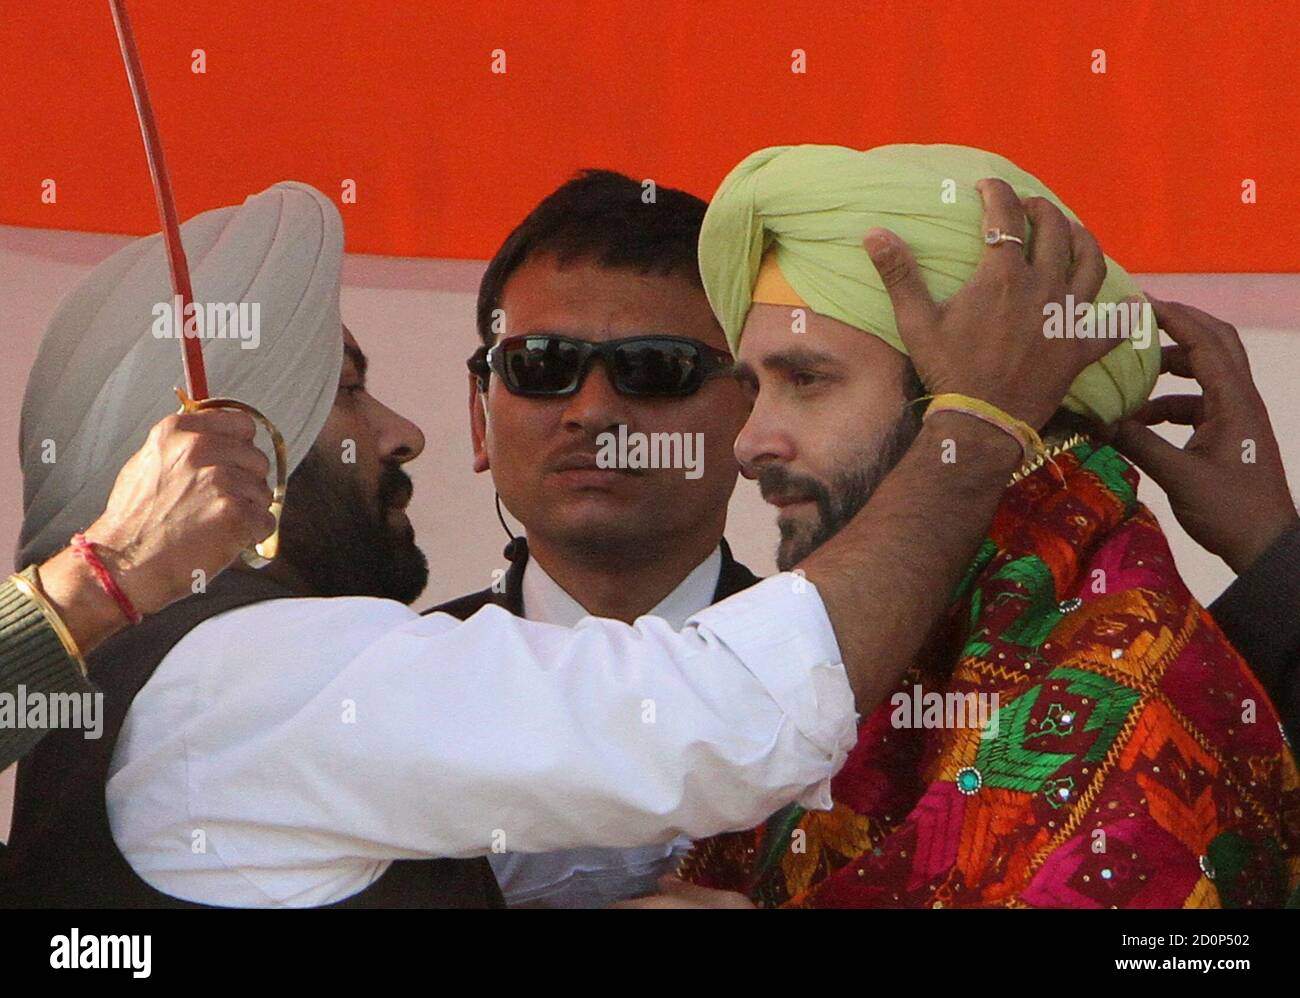 Rahul Gandhi (R), a lawmaker and son of Congress party chief Sonia Gandhi, is presented with a turban by his party supporters during a campaign rally ahead of state assembly elections at Sirhind in the northern Indian state of Punjab January 27, 2012.  REUTERS/Ajay Verma (INDIA - Tags: ELECTIONS POLITICS) Stock Photo